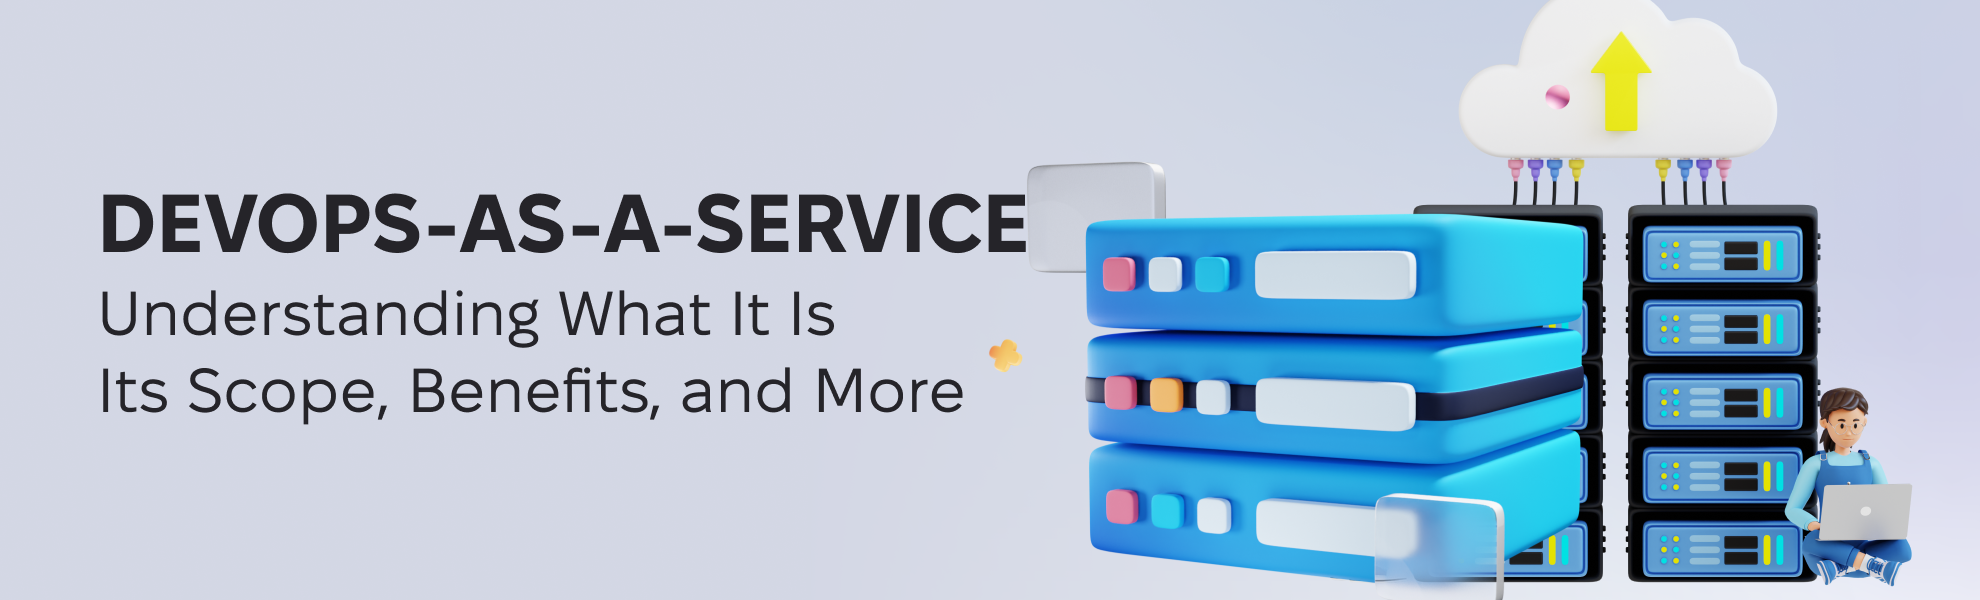 DevOps-as-a-Service – Understanding What It Is, Its Scope, Benefits, and More